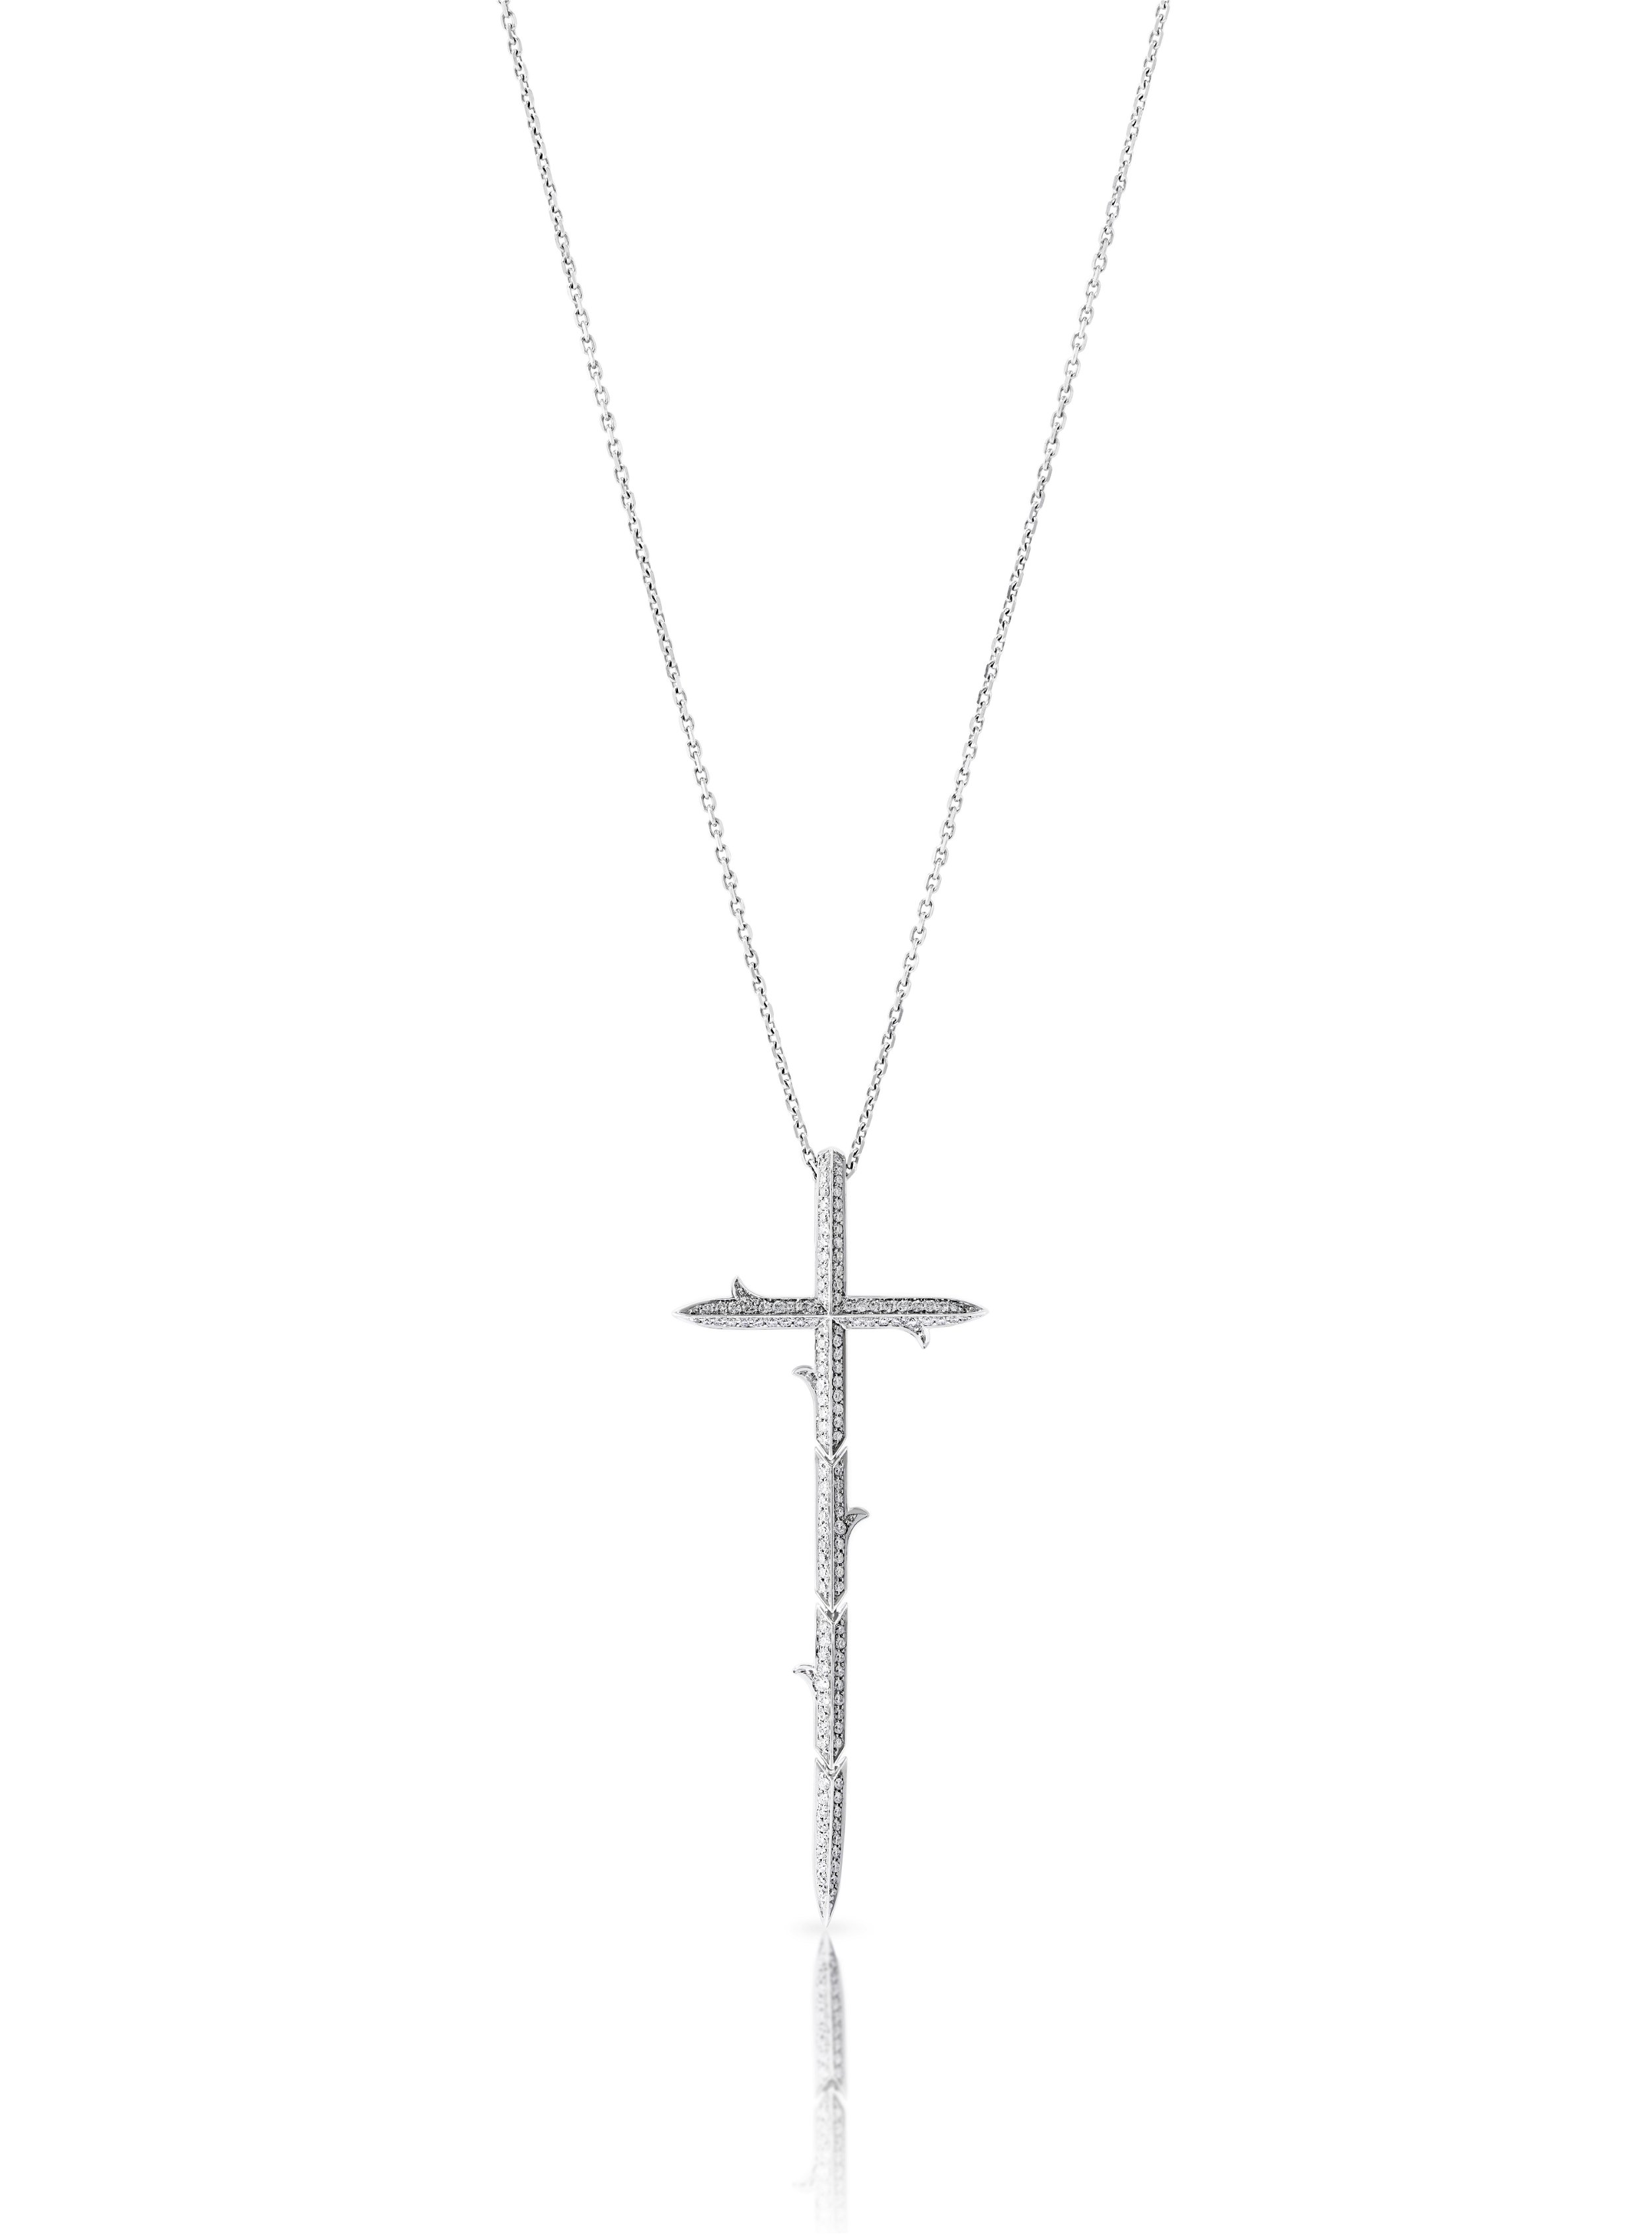 Thorn Embrace Very Cross Necklace with White Diamonds in 18kt White Gold